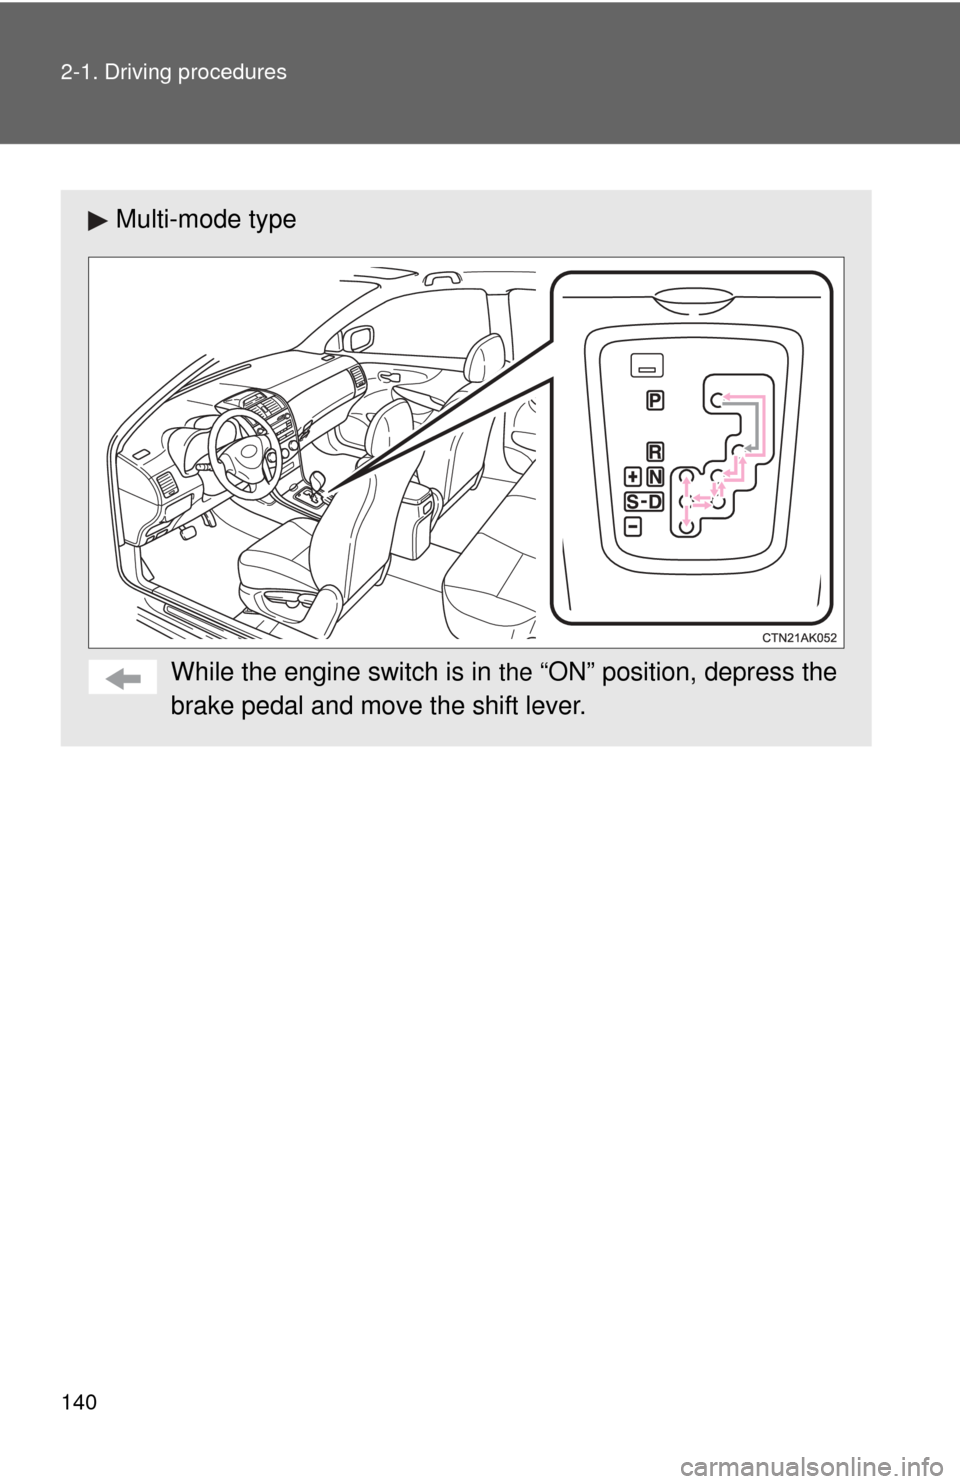 TOYOTA COROLLA 2012 10.G Service Manual 140 2-1. Driving procedures
Multi-mode typeWhile the engine switch is in 
the “ON” position, depress the
brake pedal and move the shift lever. 